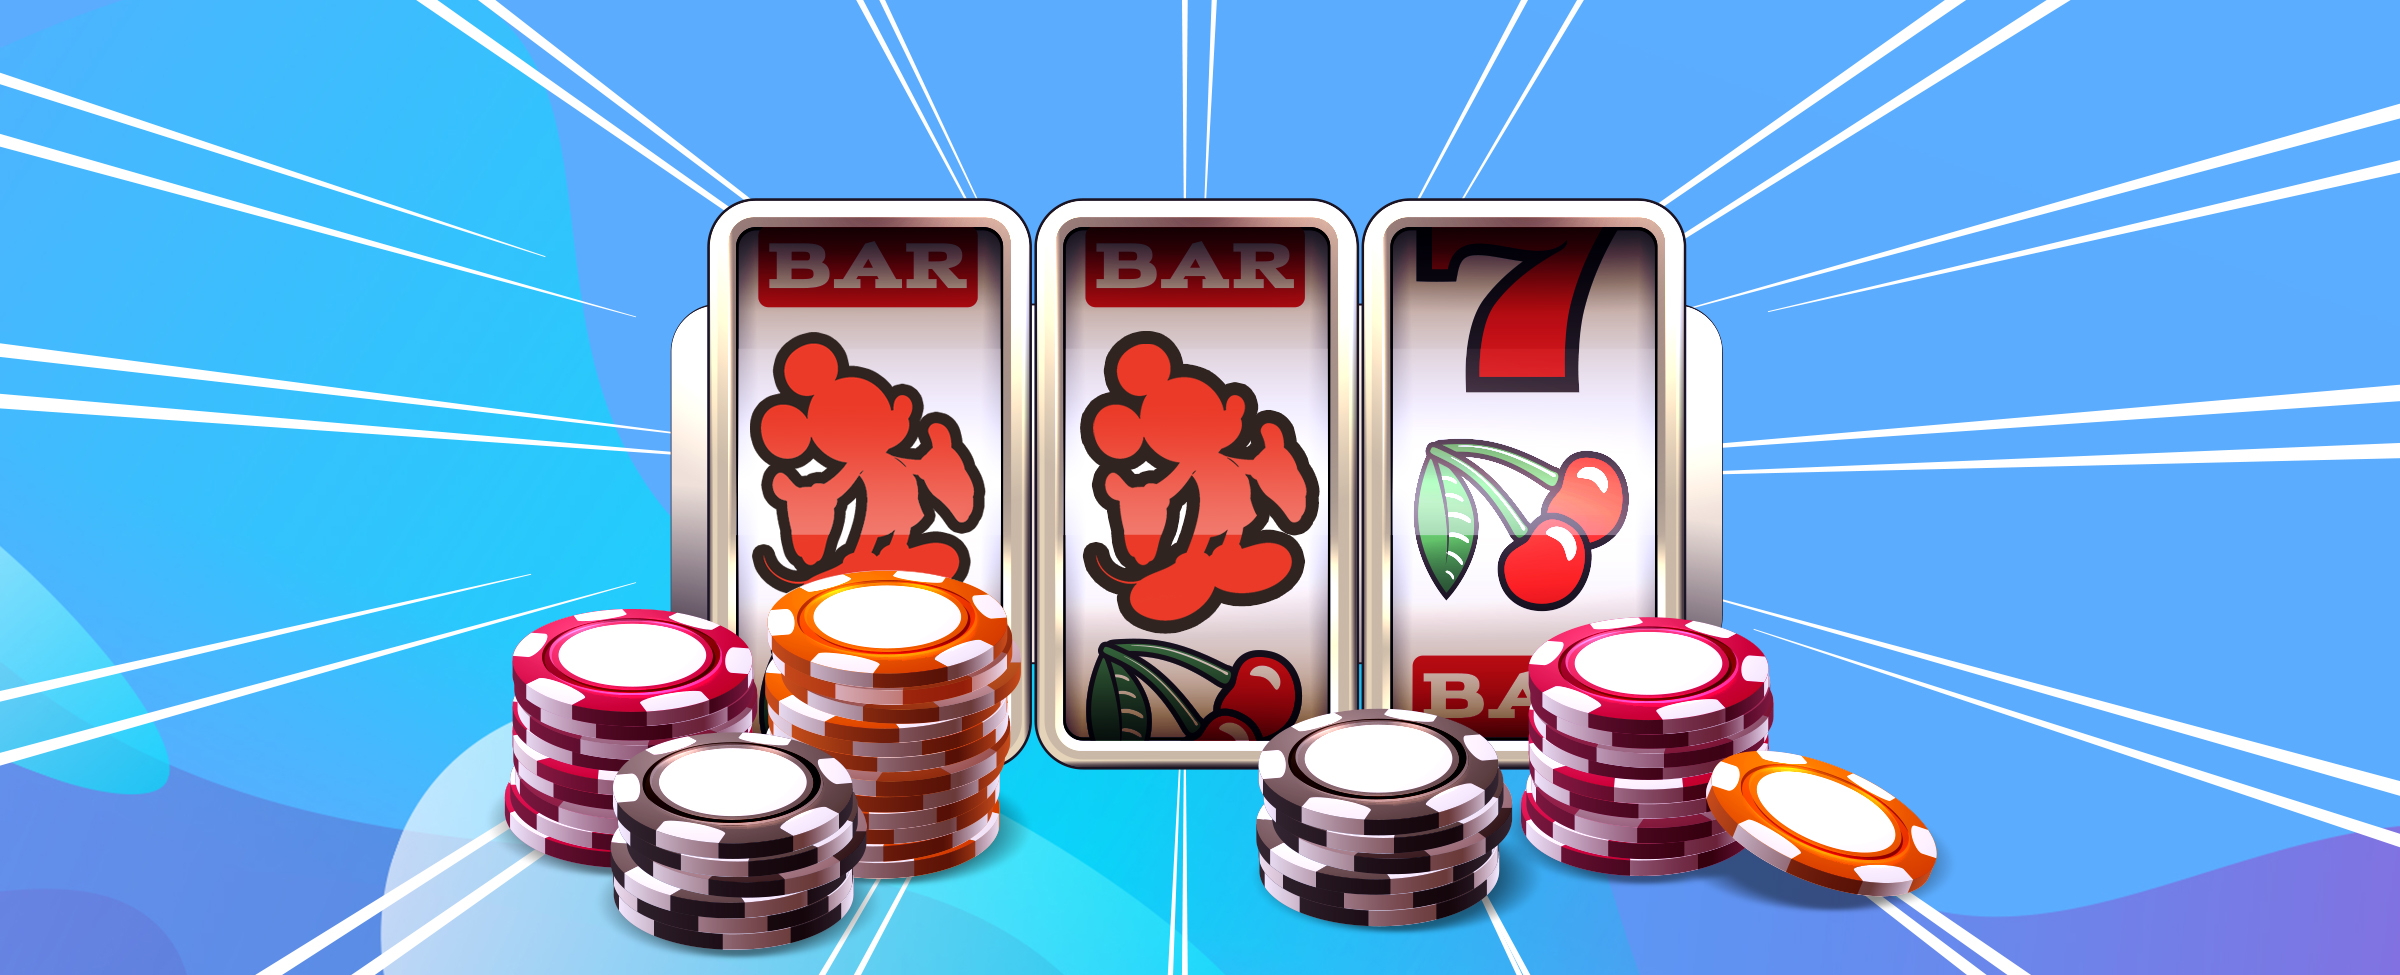 Three 3D-animated slot reels are shown in the middle of the image, two with matching red Mickey-Mouse silhouettes, and the other, the number seven. In front are stacks of casino chips. Overall, set against a blue and purple abstract background.